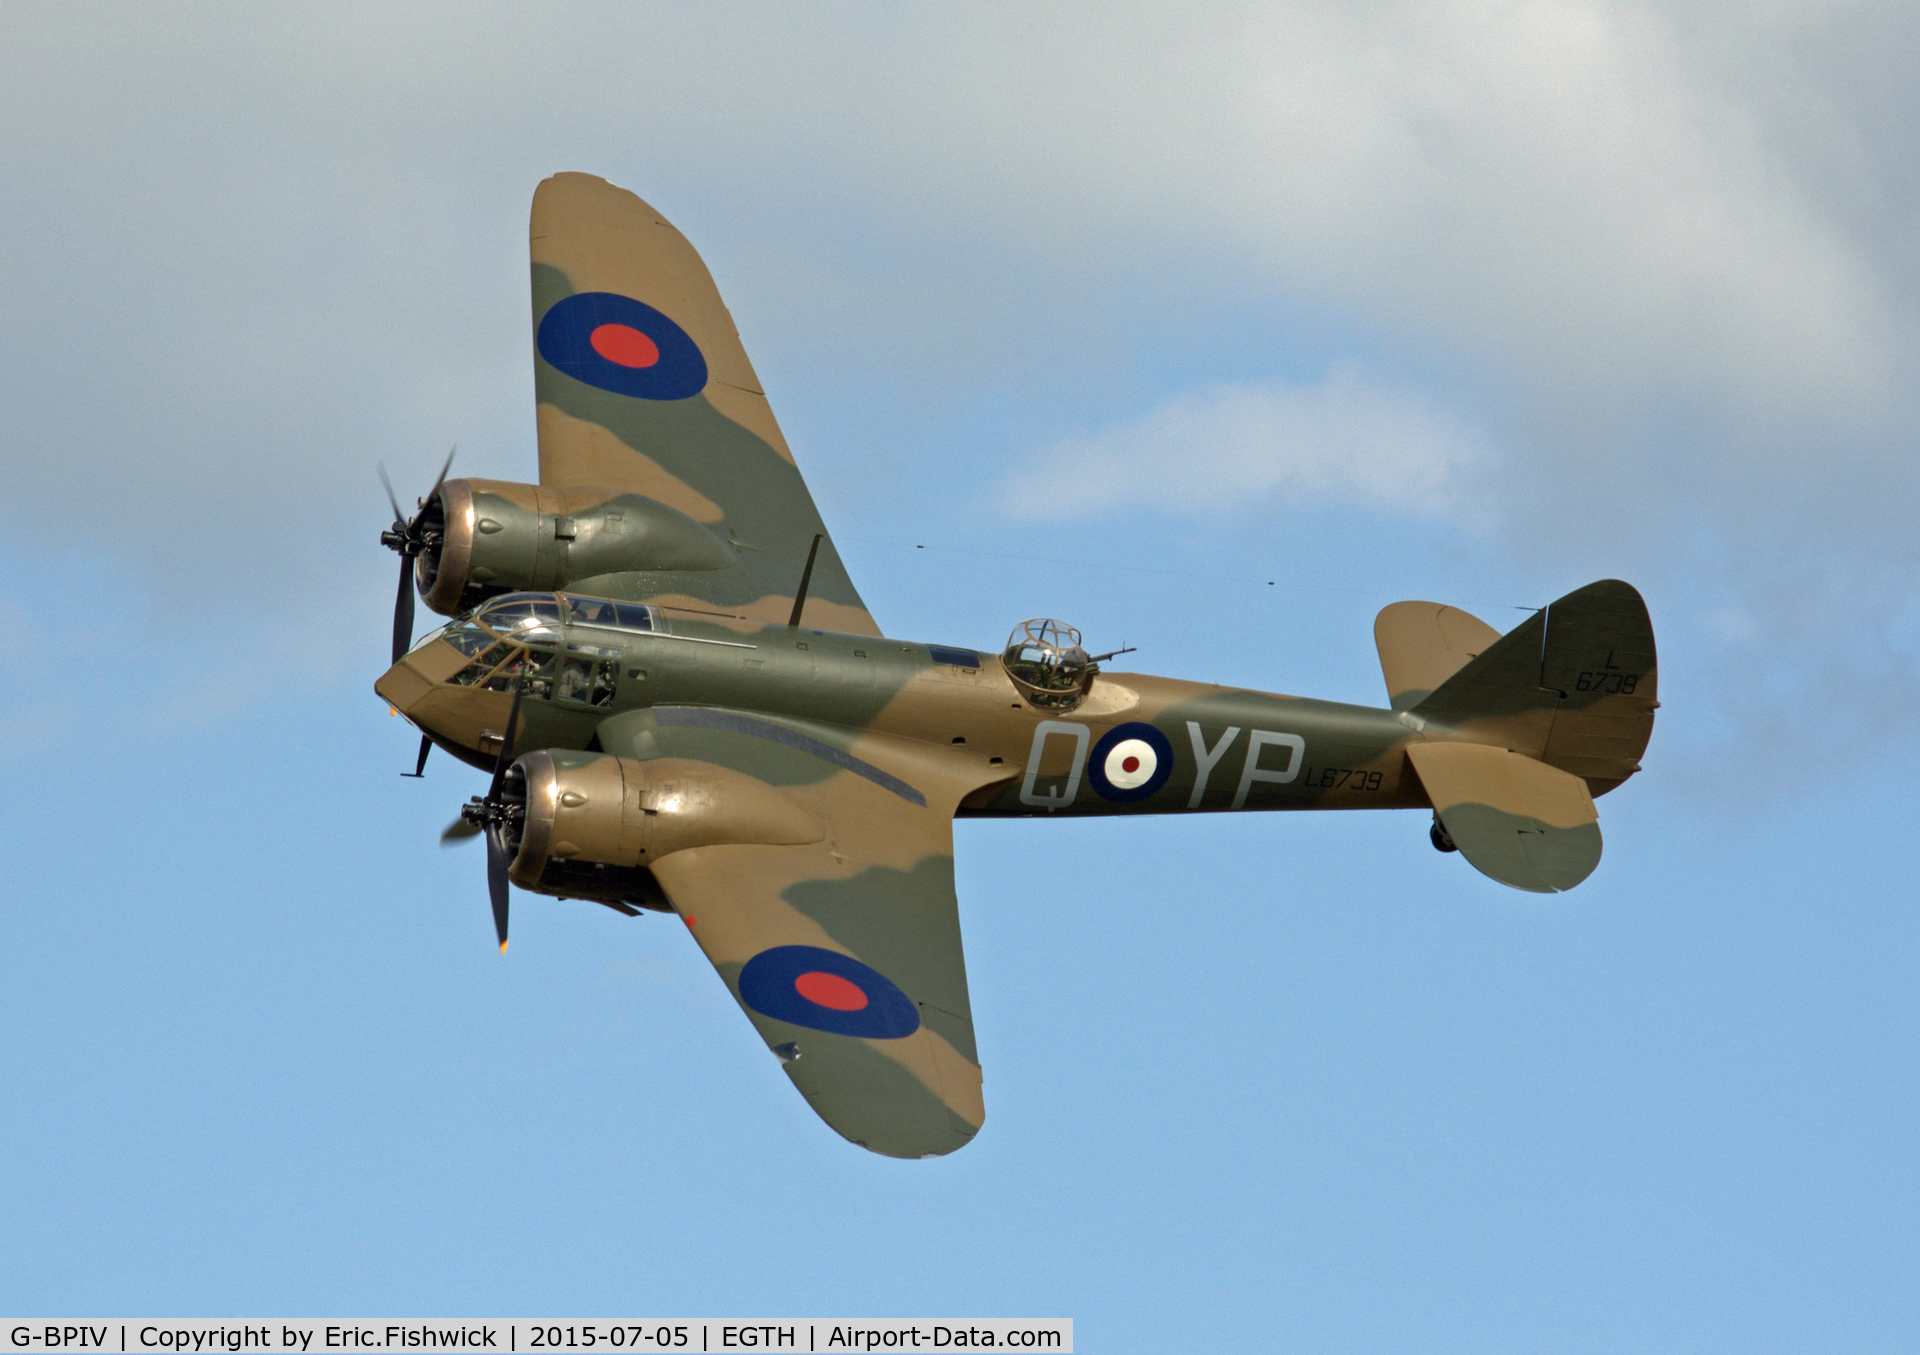 G-BPIV, 1943 Bristol 149 Bolingbroke Mk.IVT C/N 10201, 41. L6739 in display mode at the Shuttleworth Military Pagent Airshow, July 2015.